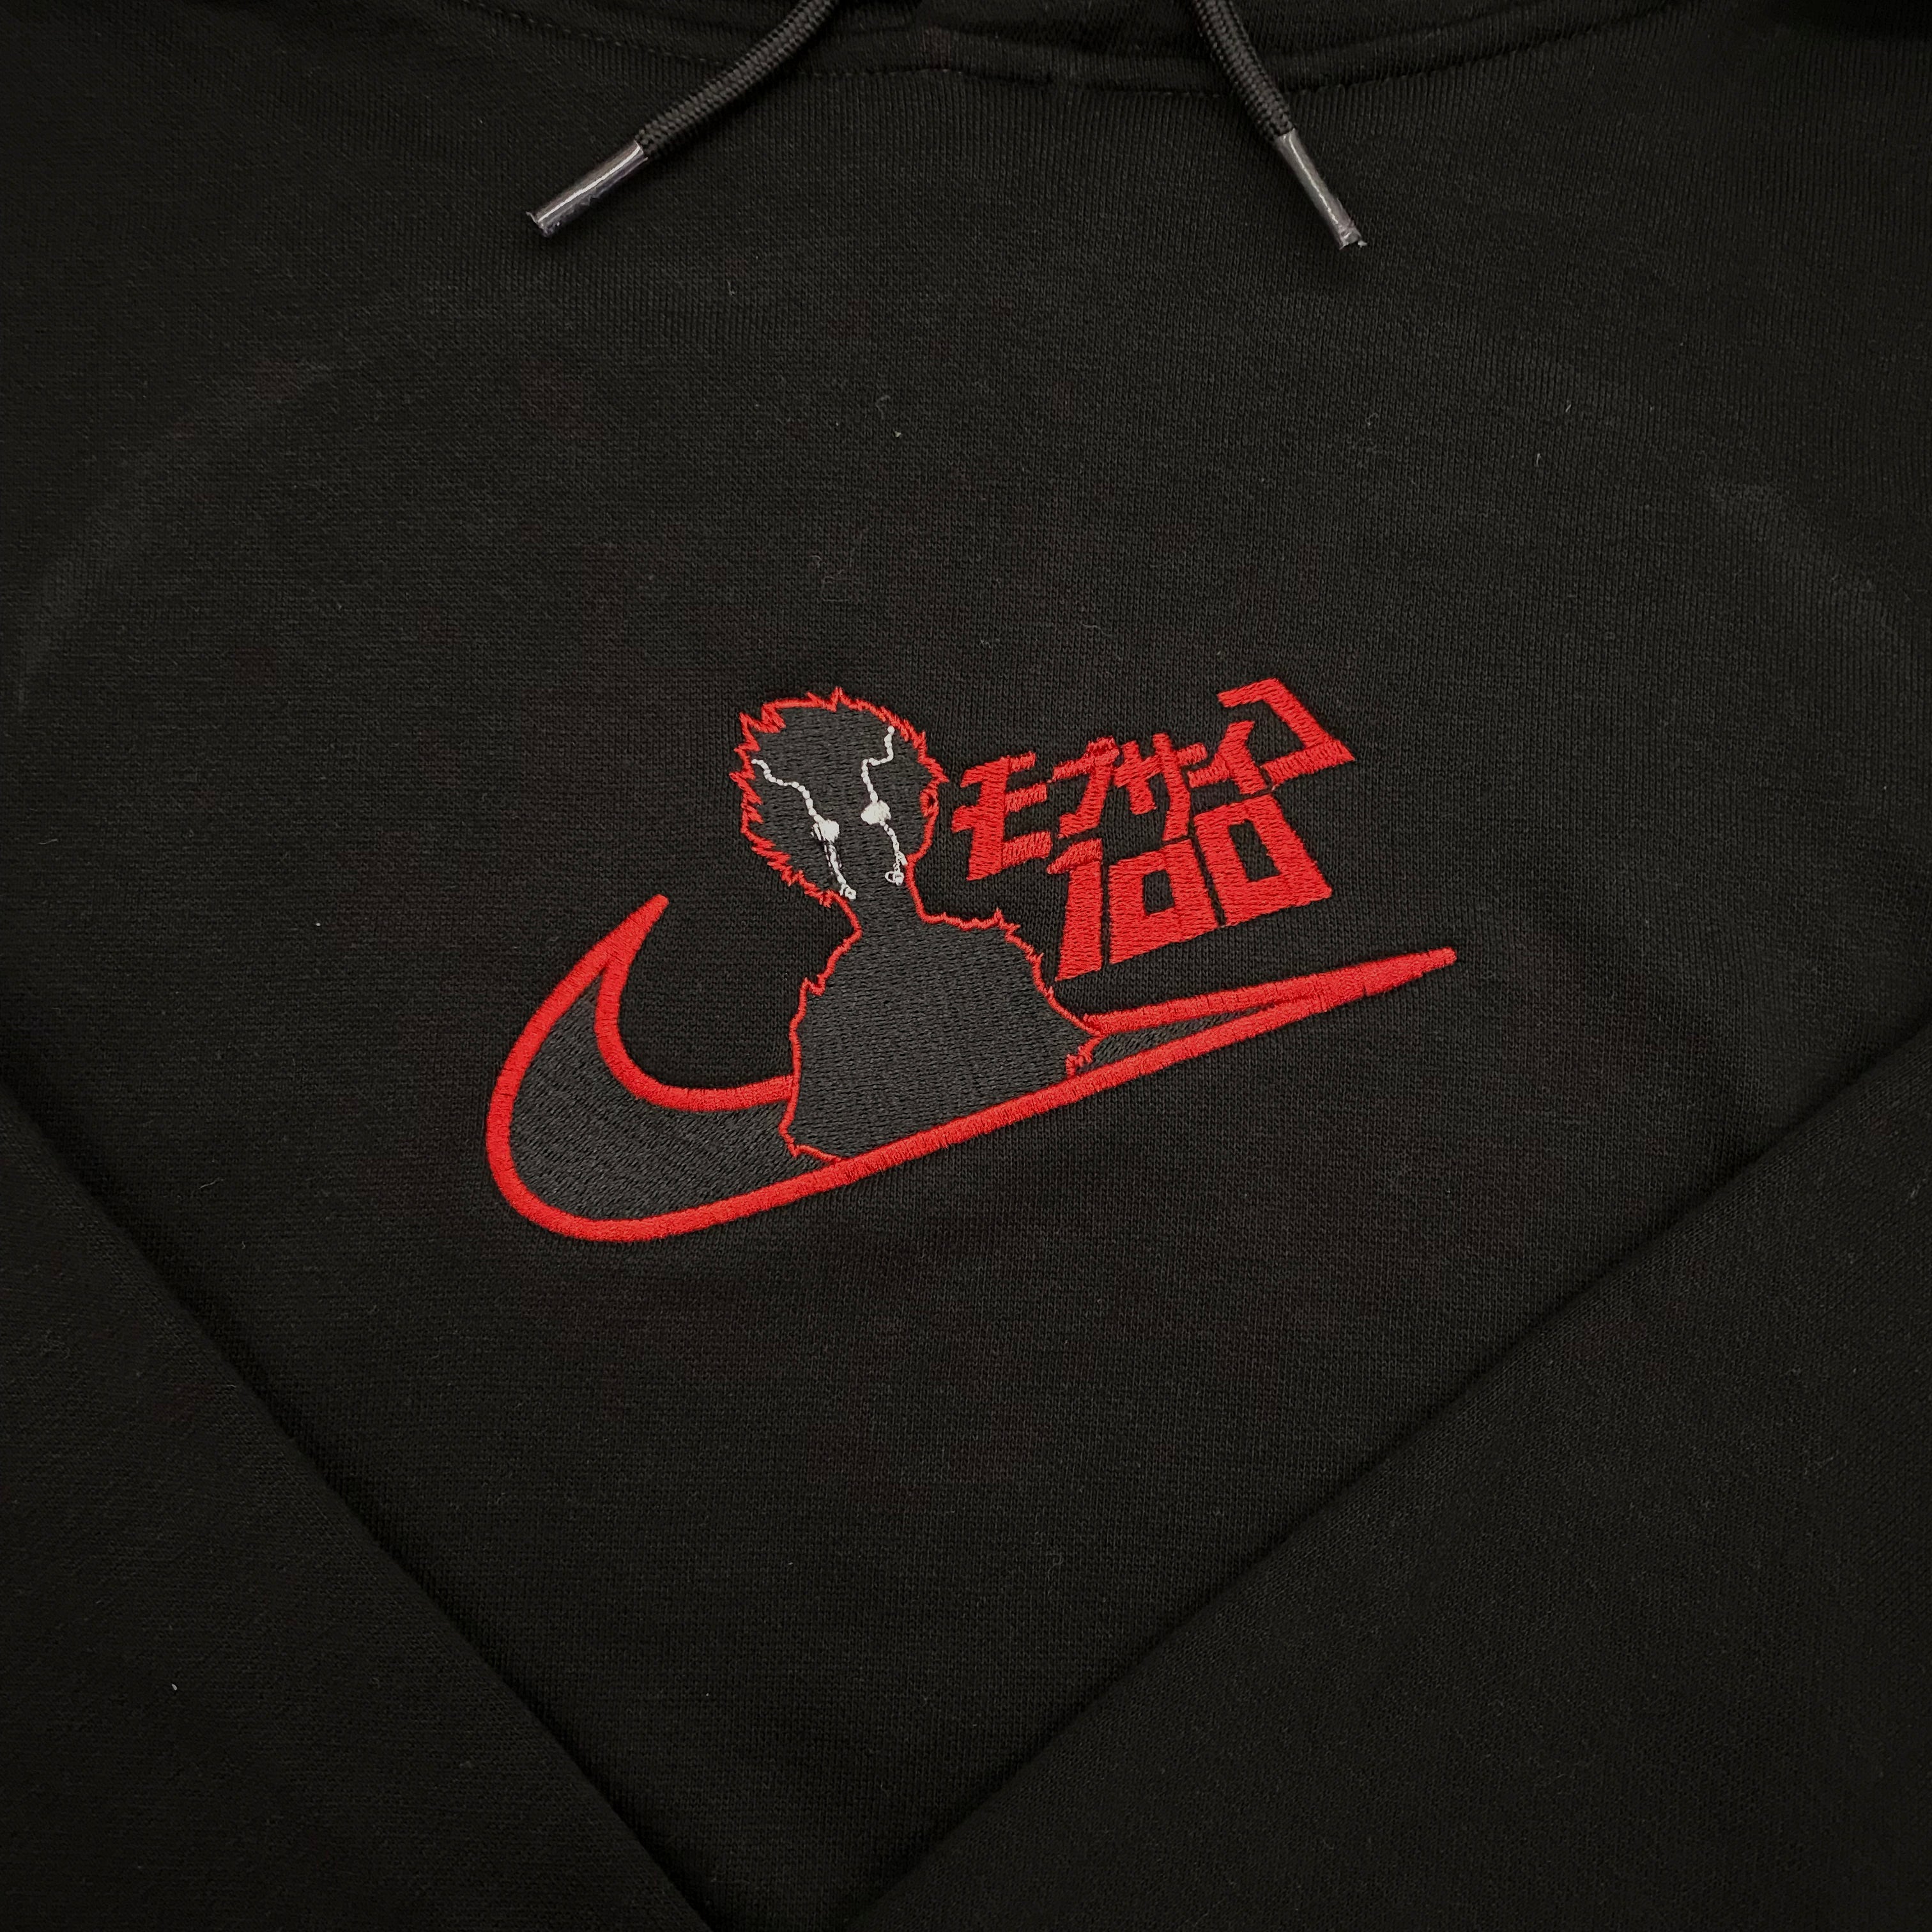 LIMITED MOB PSYCHO 100% RAGE EMBROIDERED HOODIE